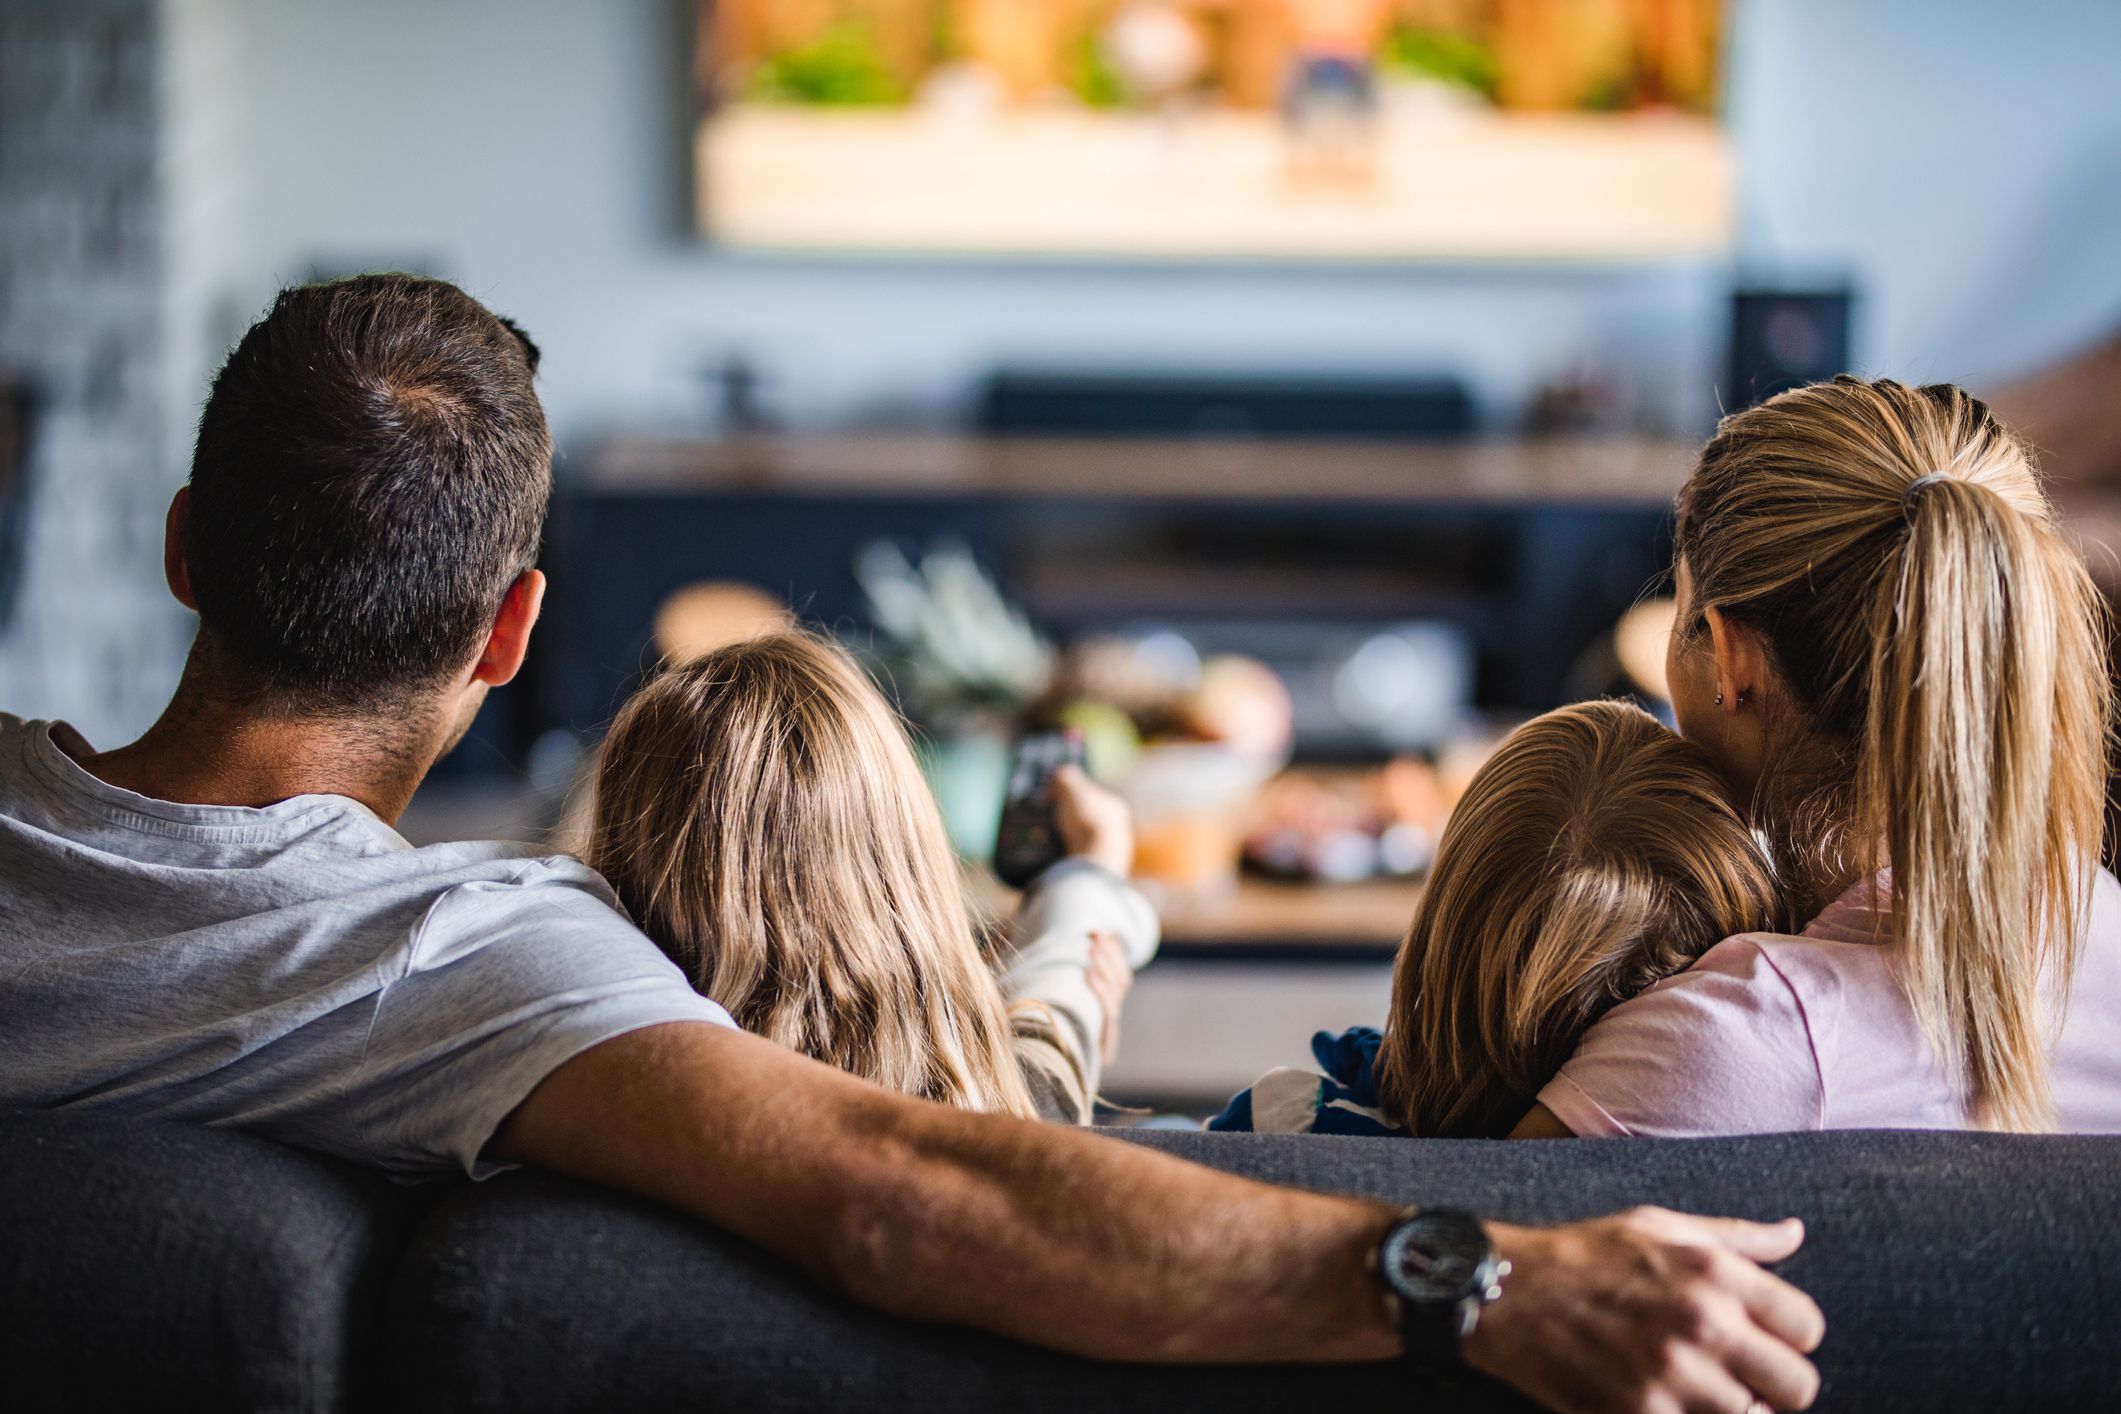 A family is sitting on the couch, and the little girl in the middle is holding the remote